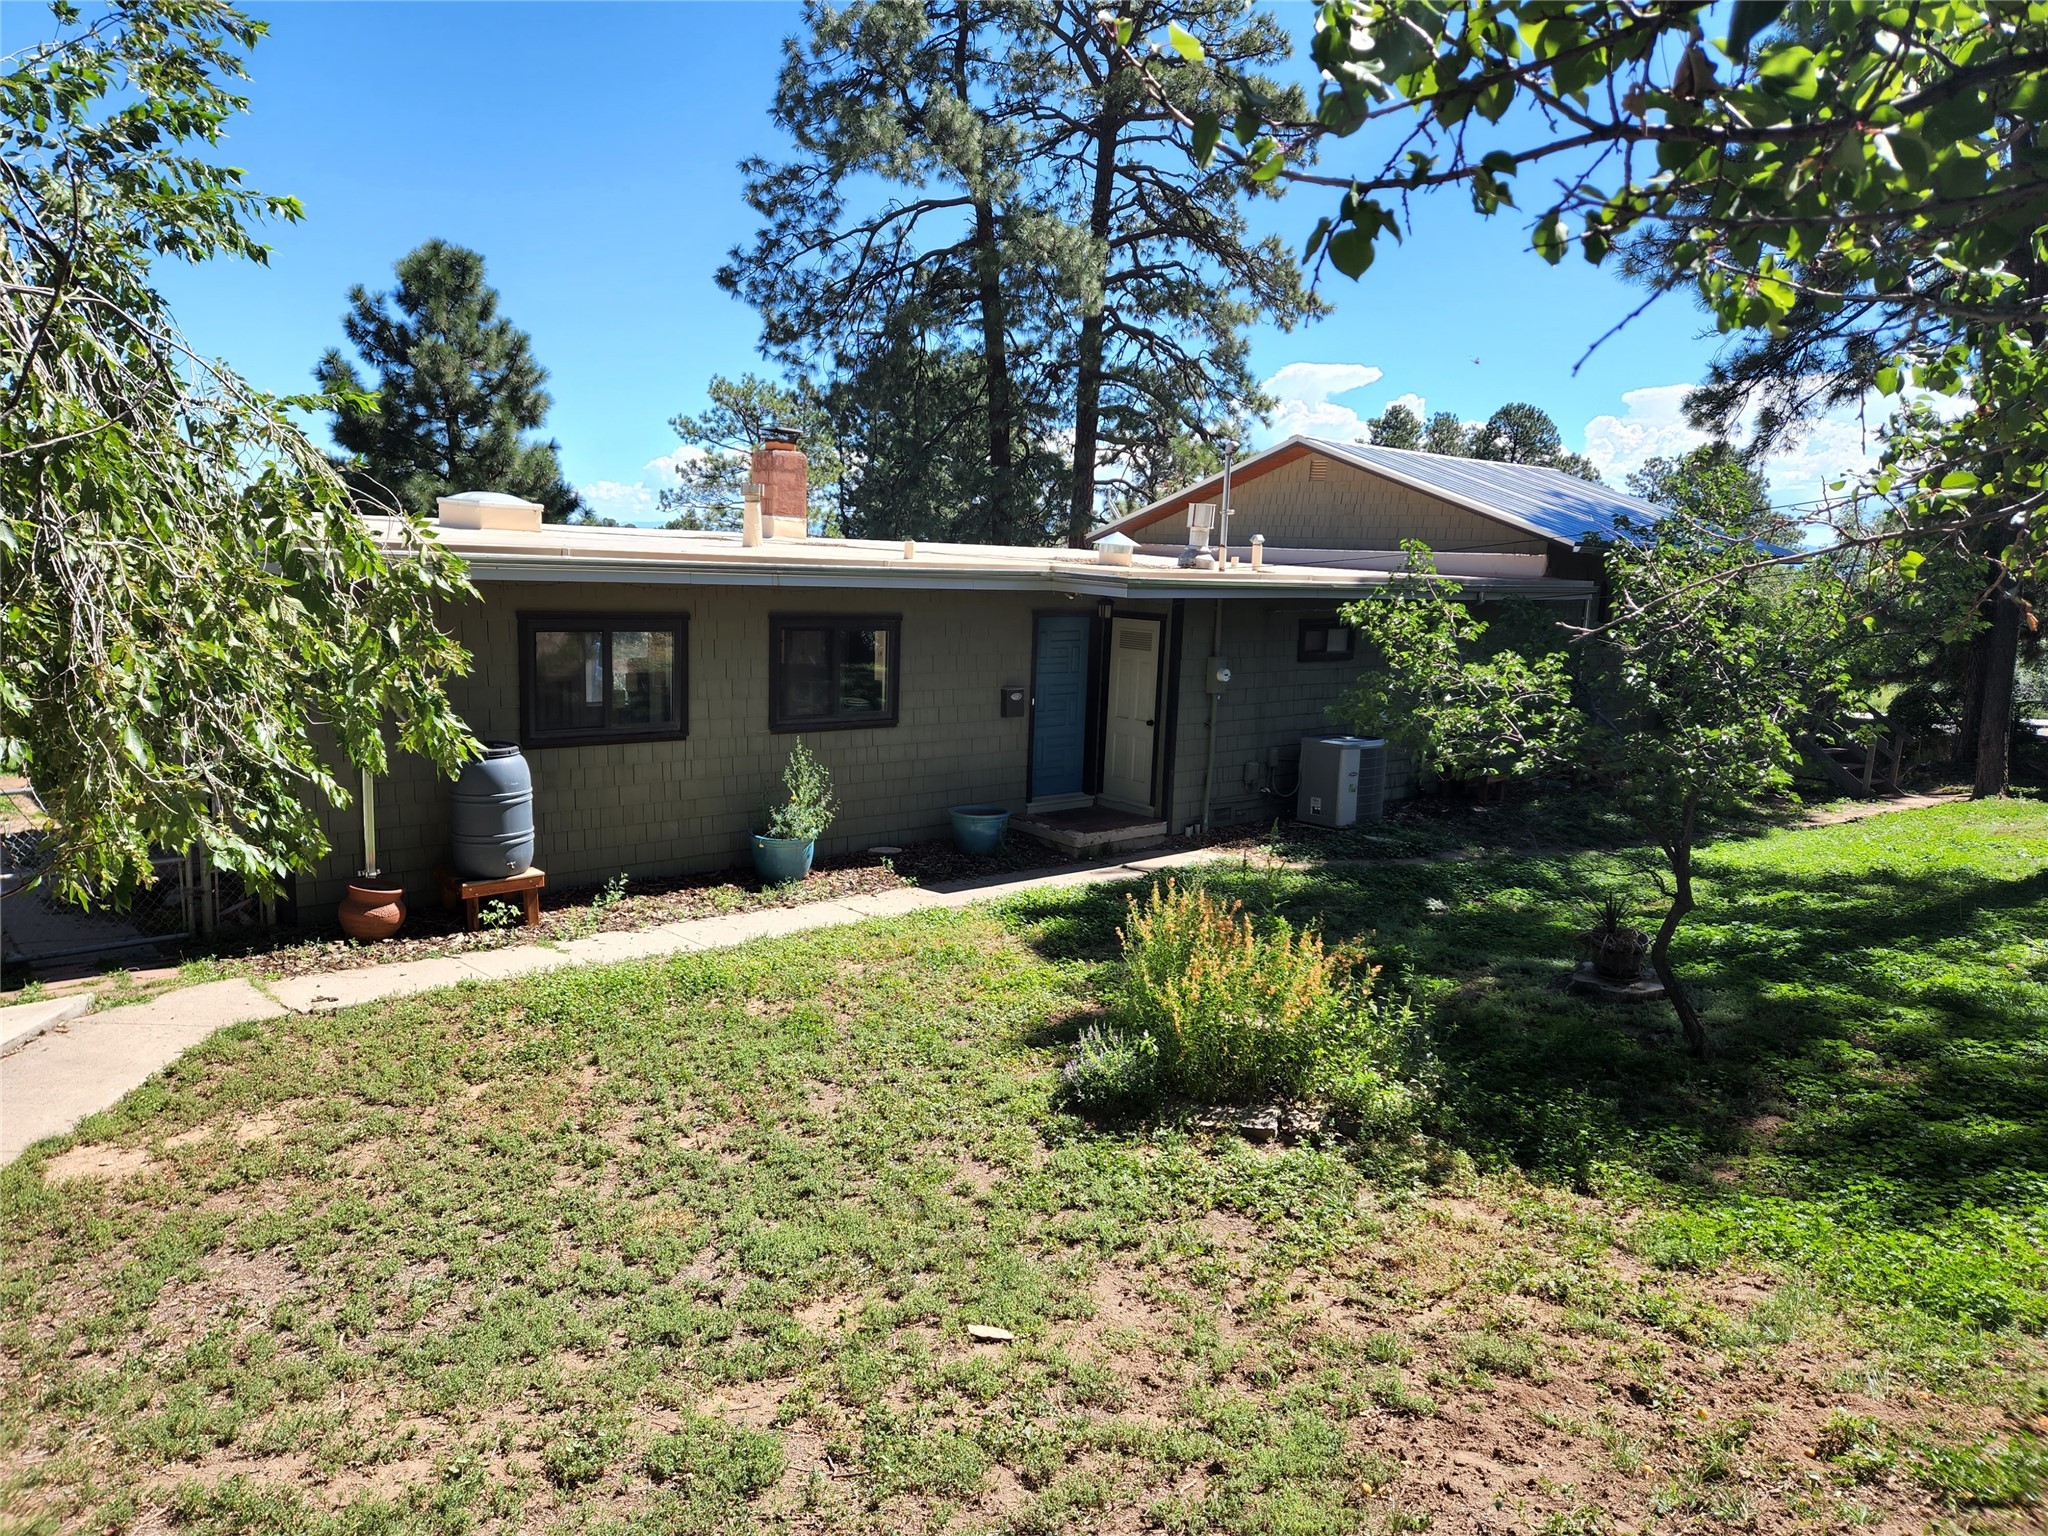 2196 45th, Los Alamos, New Mexico 87544, 4 Bedrooms Bedrooms, ,2 BathroomsBathrooms,Residential,For Sale,2196 45th,202232836